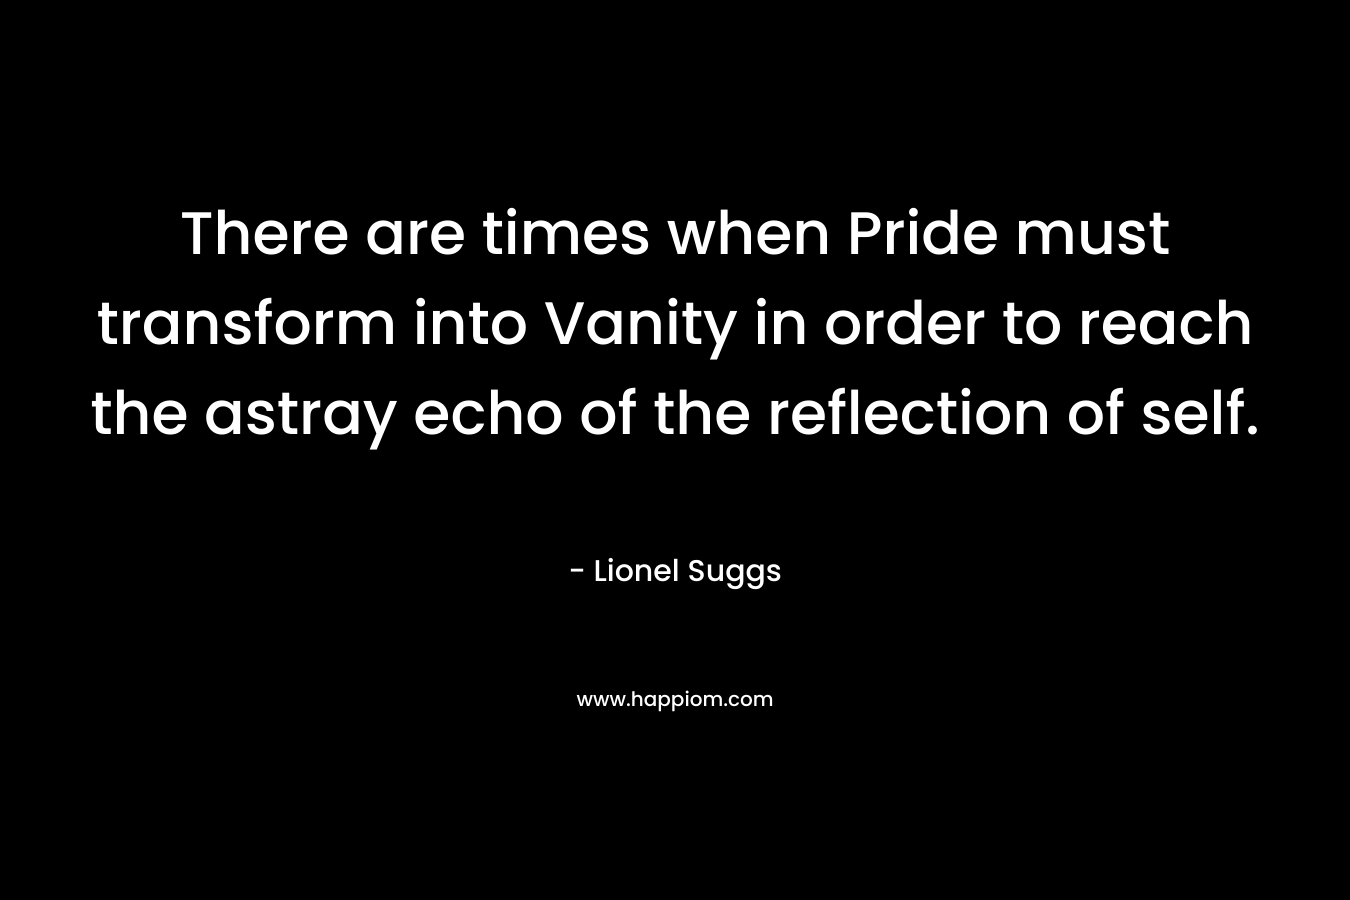 There are times when Pride must transform into Vanity in order to reach the astray echo of the reflection of self. – Lionel Suggs